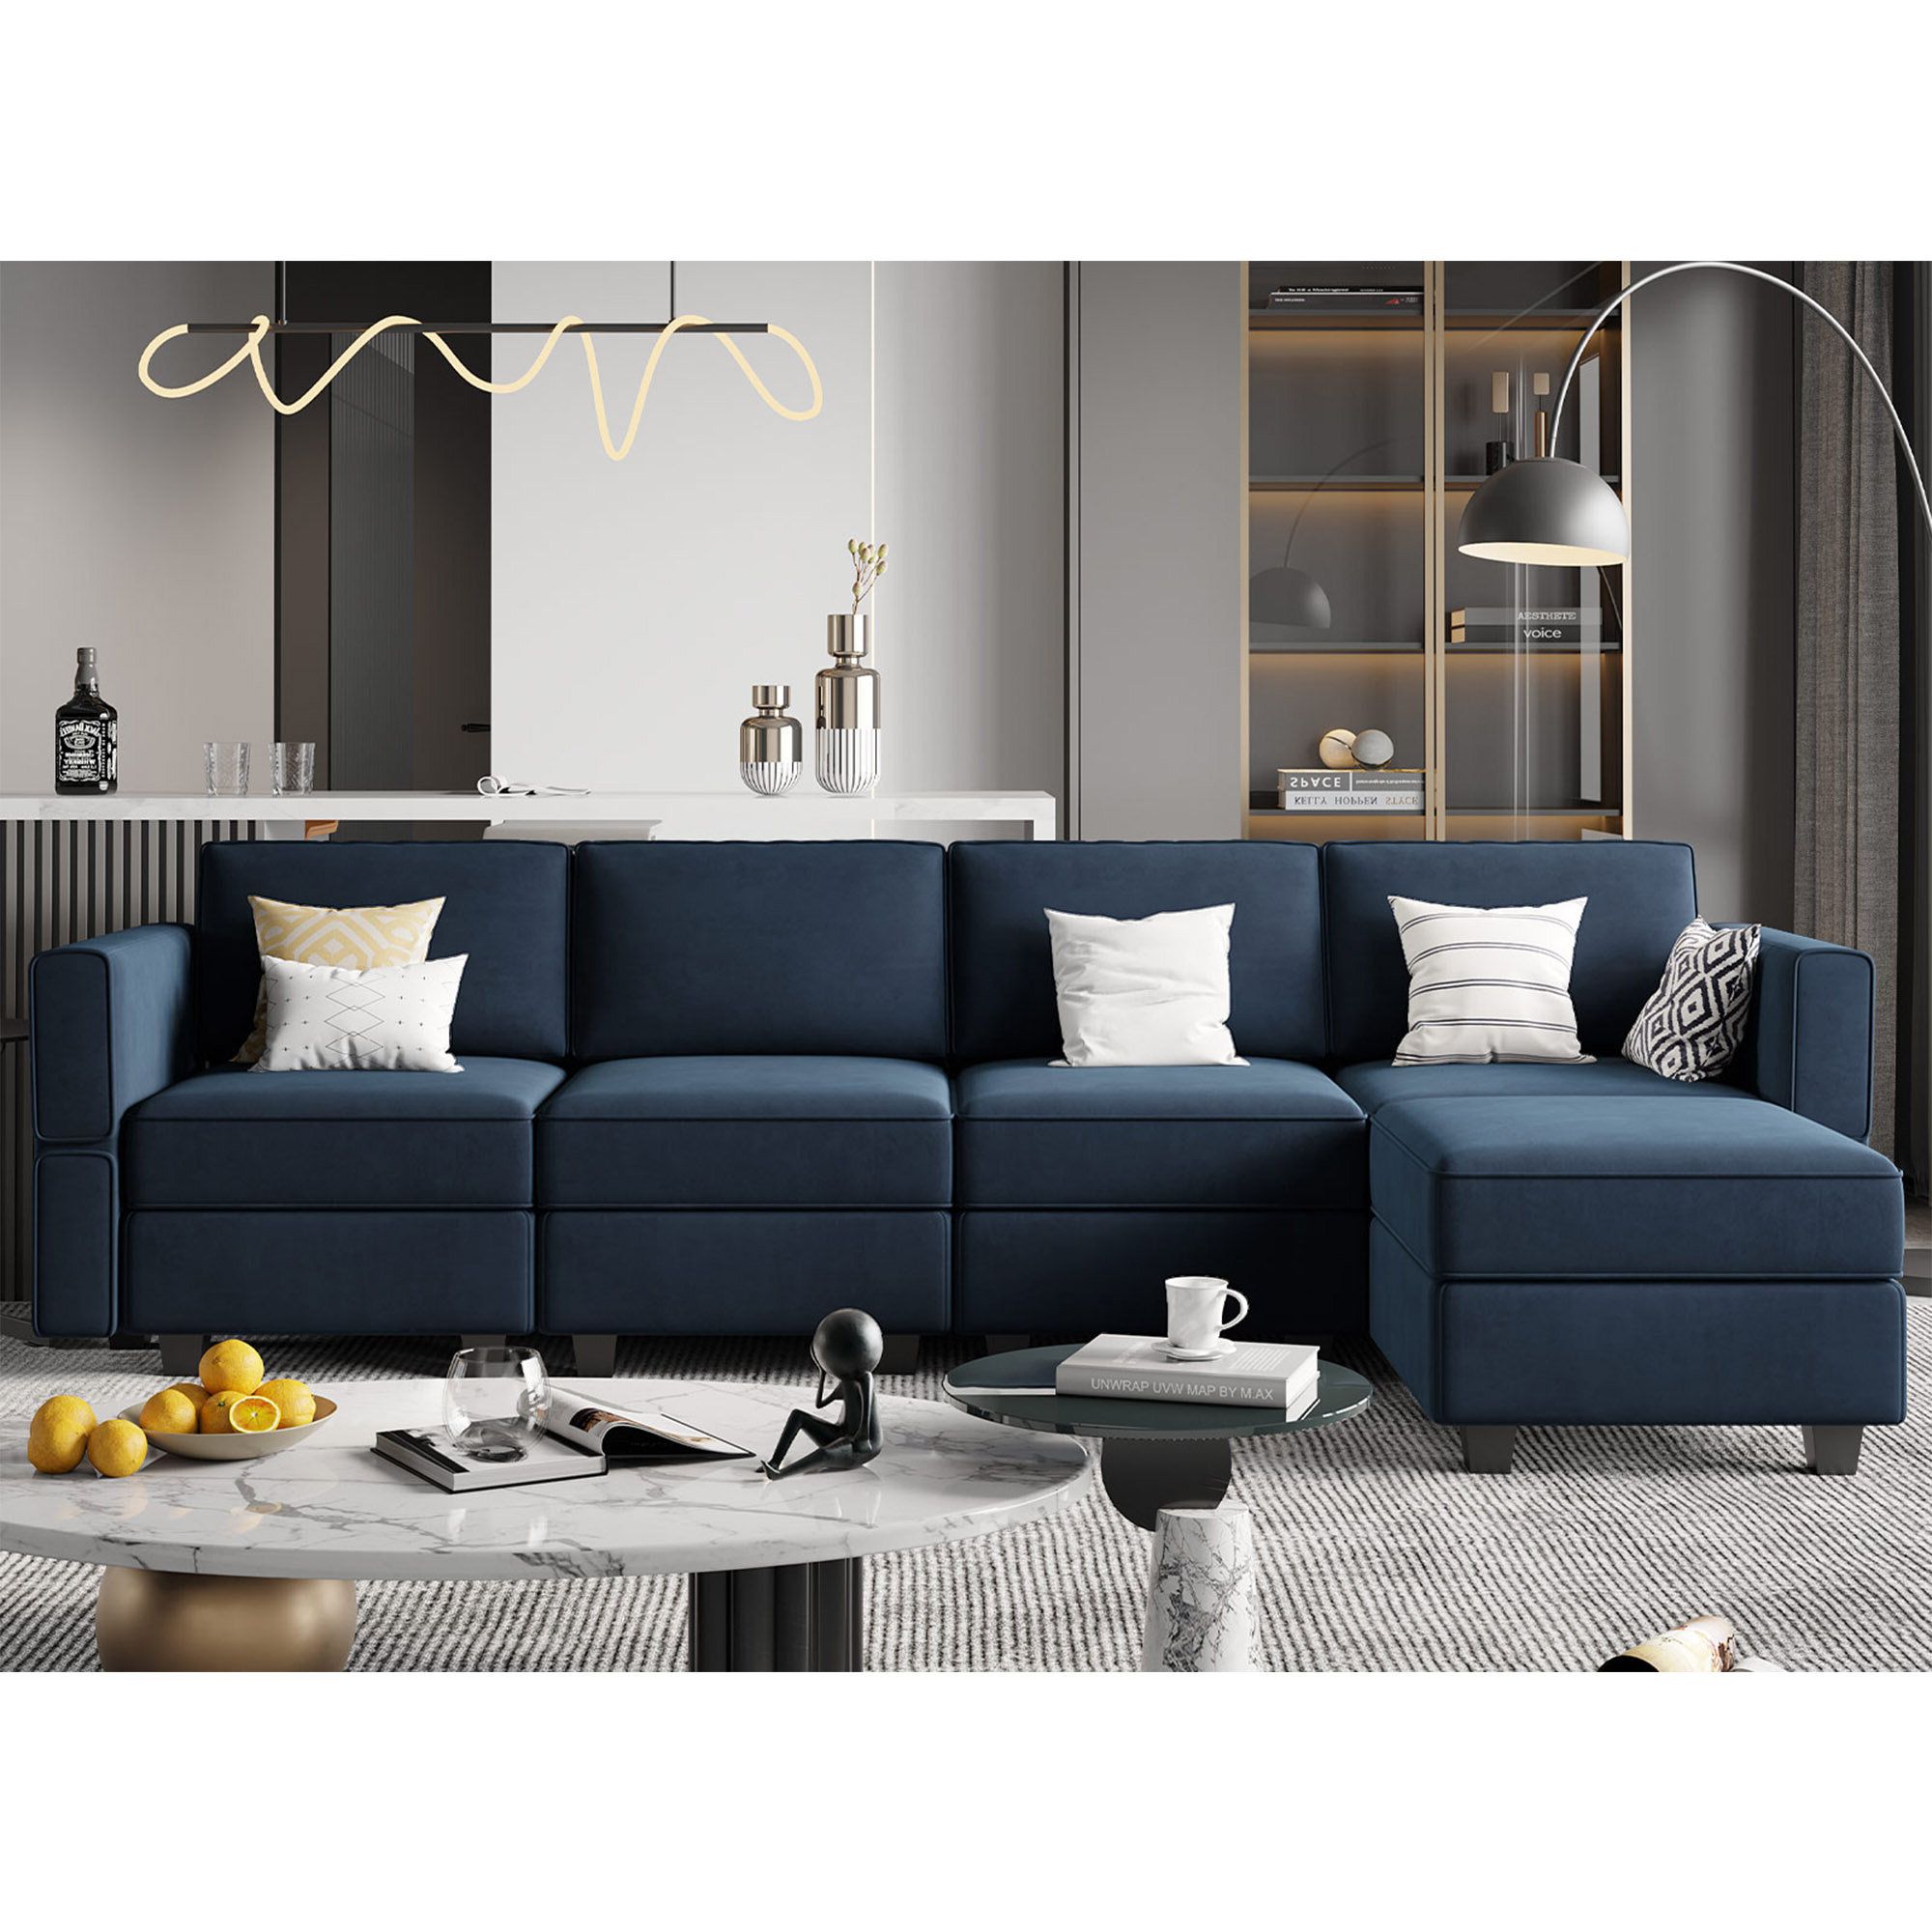 Latitude Run® Teangela 116.6'' Upholstered Sectional Sofa With Storage &  Reviews | Wayfair For Sectional Sofas With Ottomans And Tufted Back Cushion (Gallery 17 of 20)